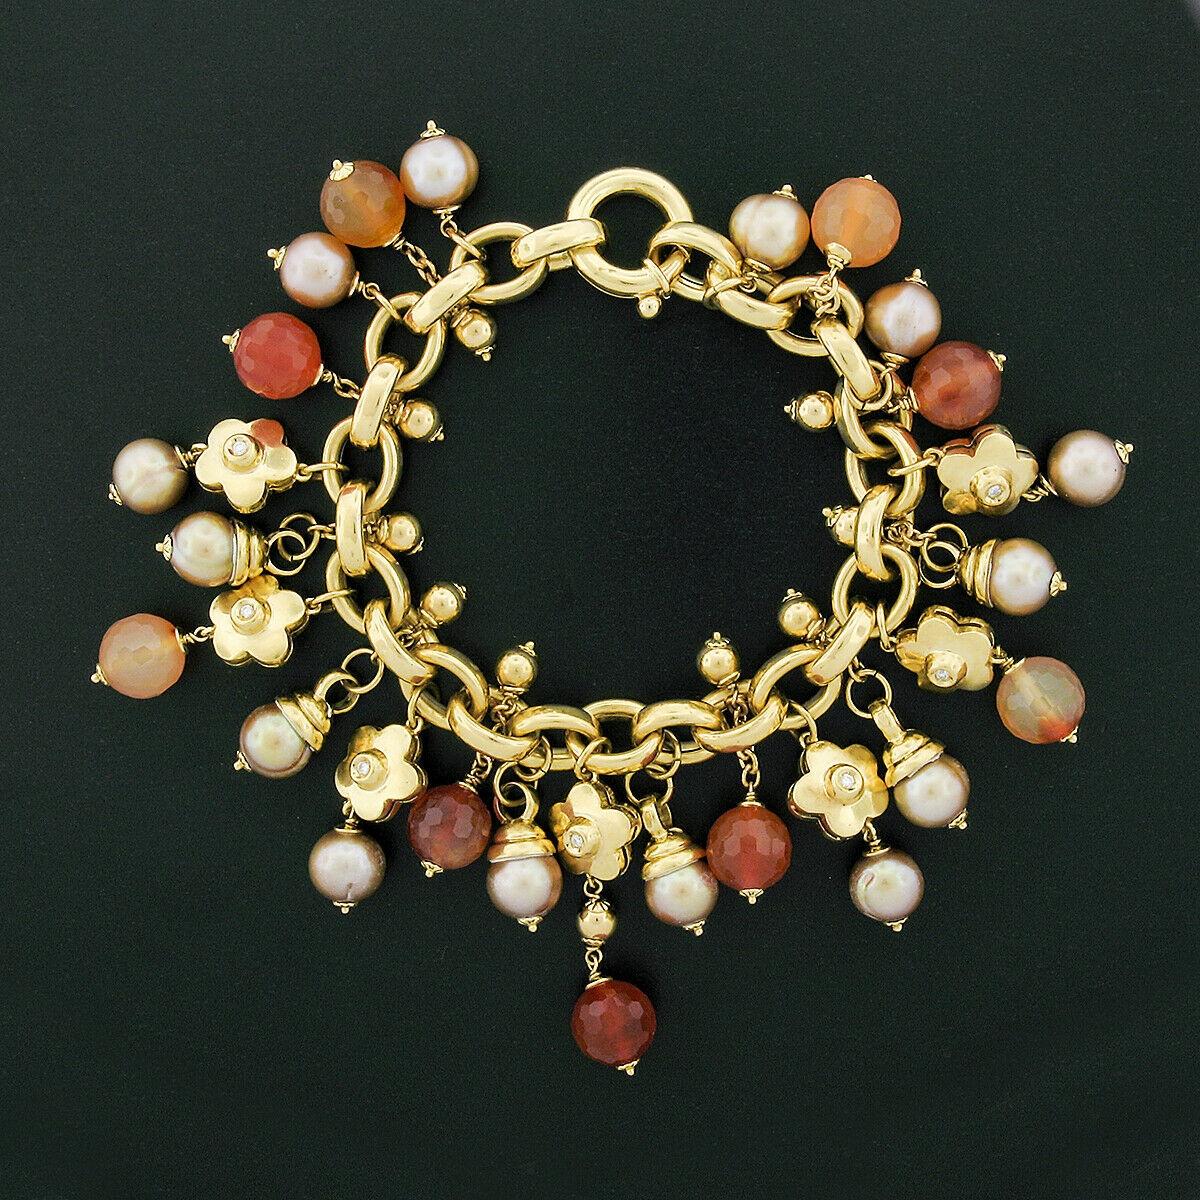 The beautiful and elegant charm bracelet was designed by Bonato Oliviero Gioielli and is crafted in solid 18k yellow gold. The fine rolo link chain will fit up to a 6.5